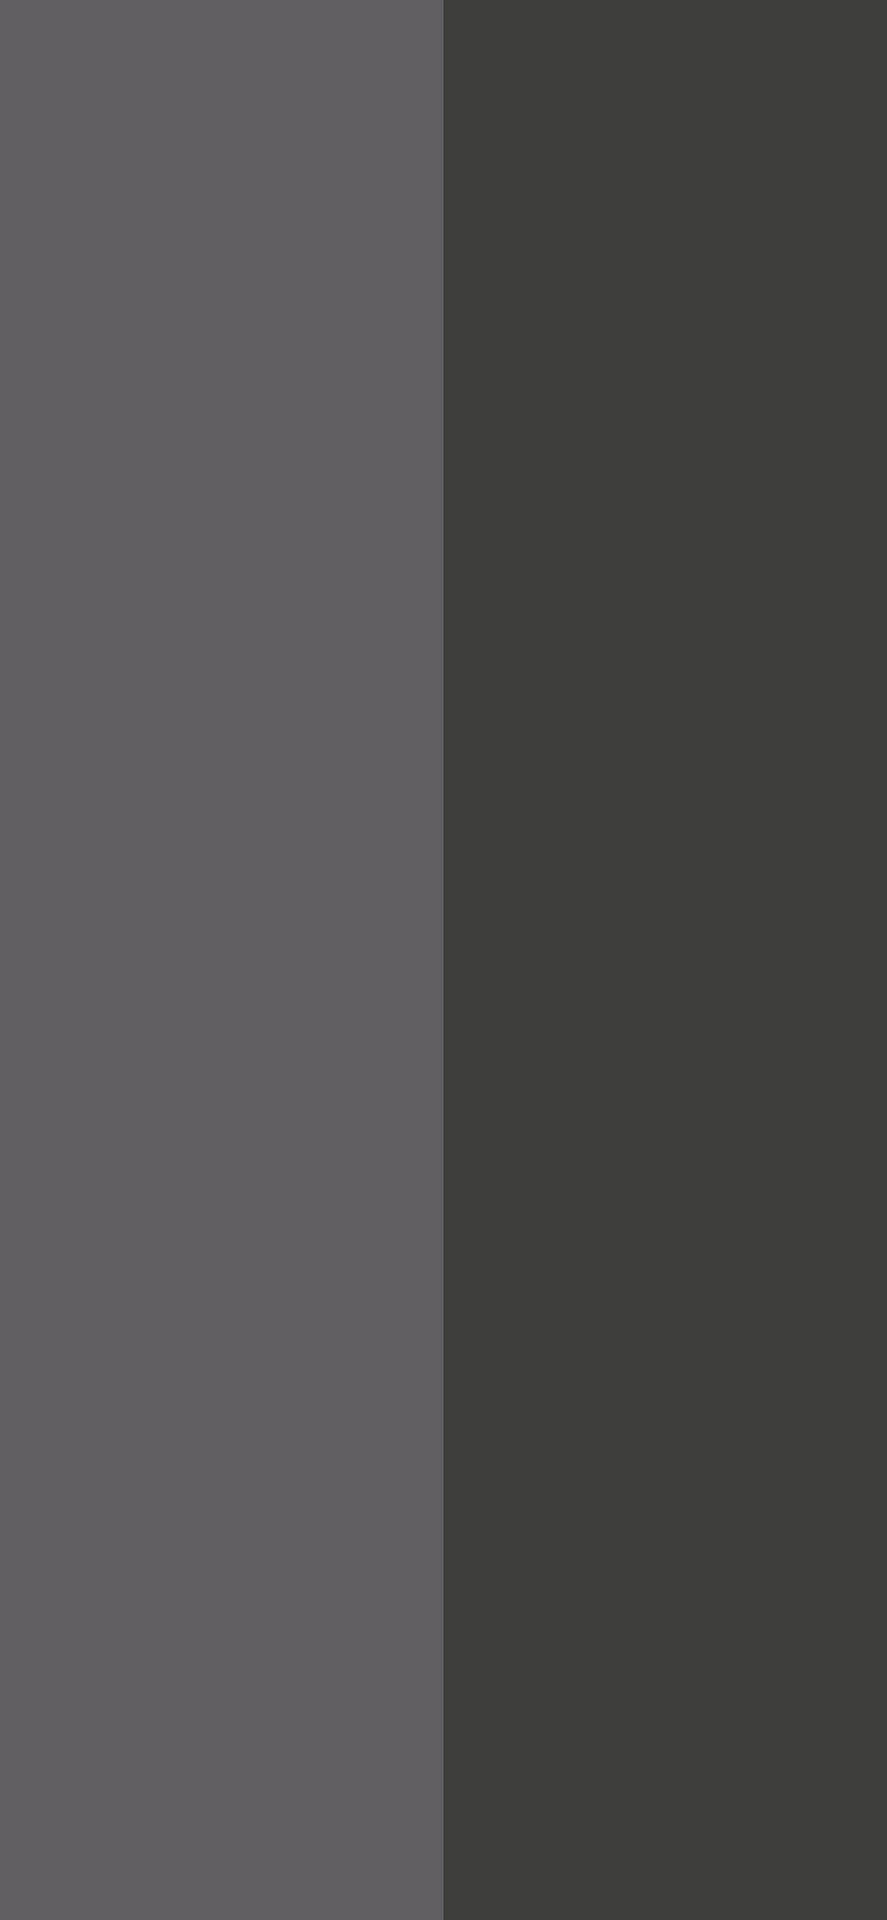 A Split Of Shades Of Gray